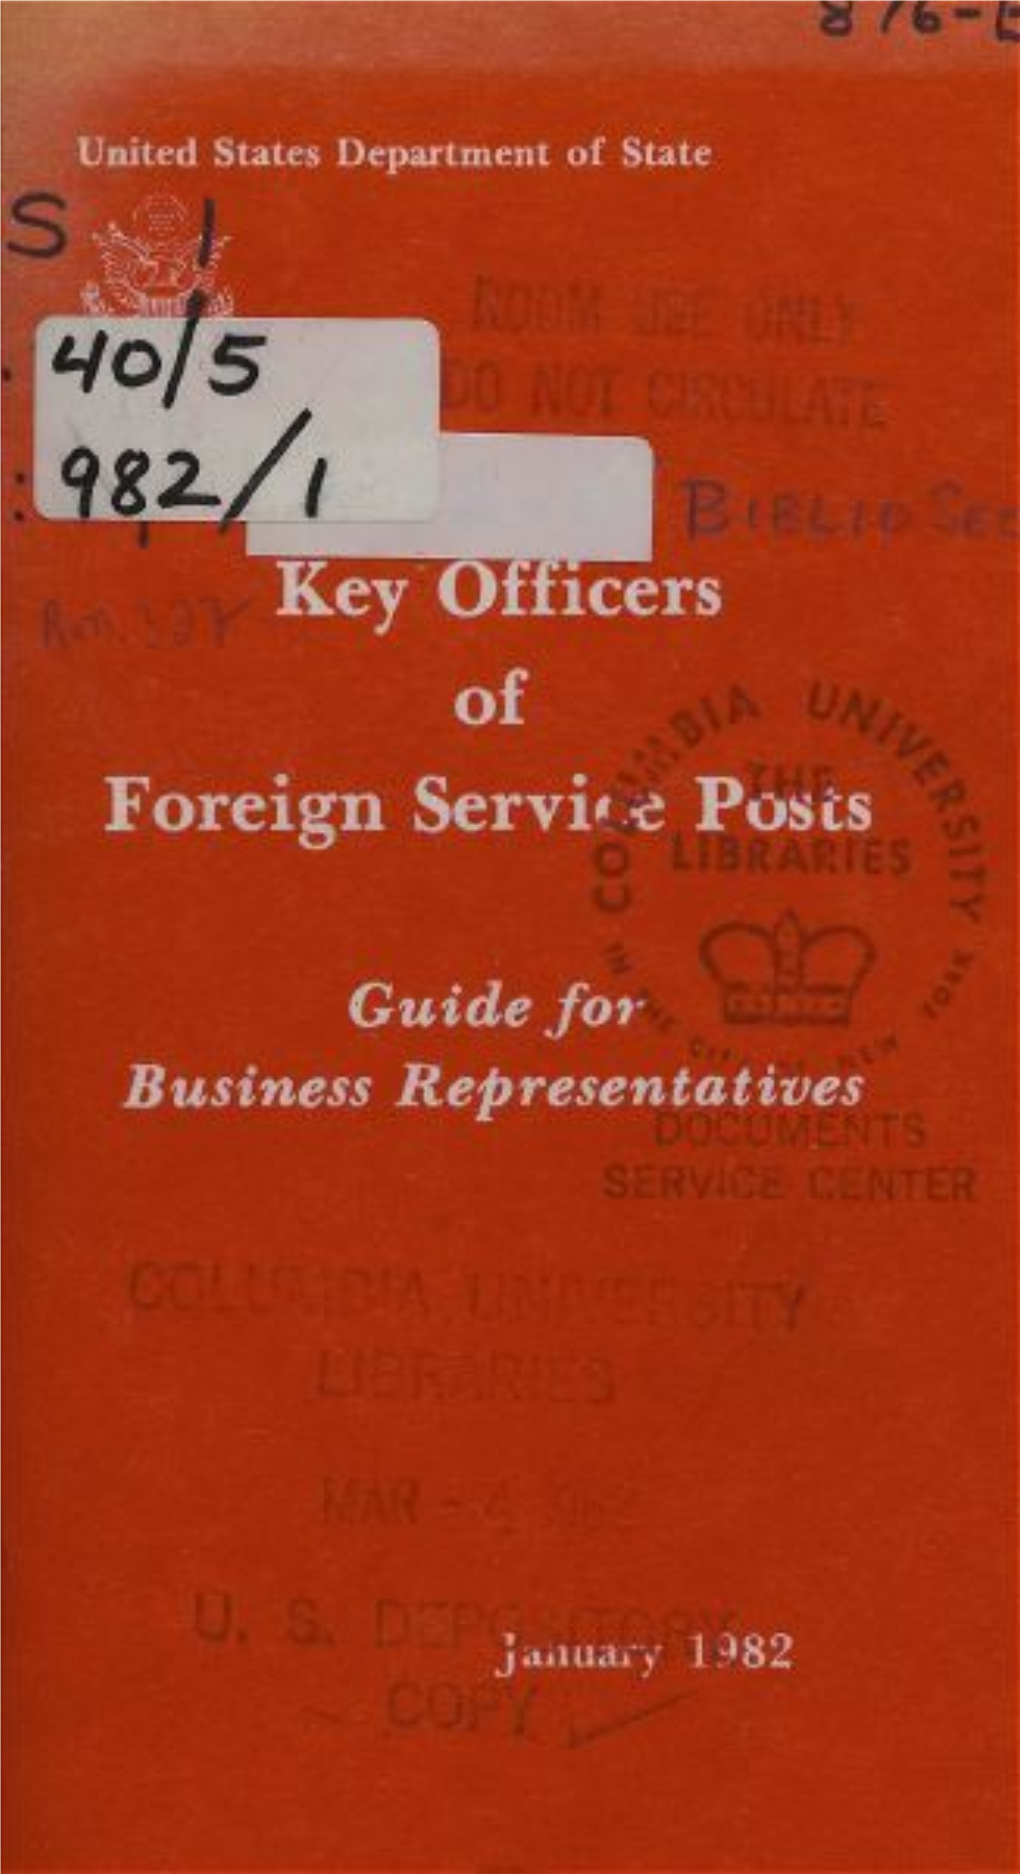 Key Officers of Foreign Servi* E Posts